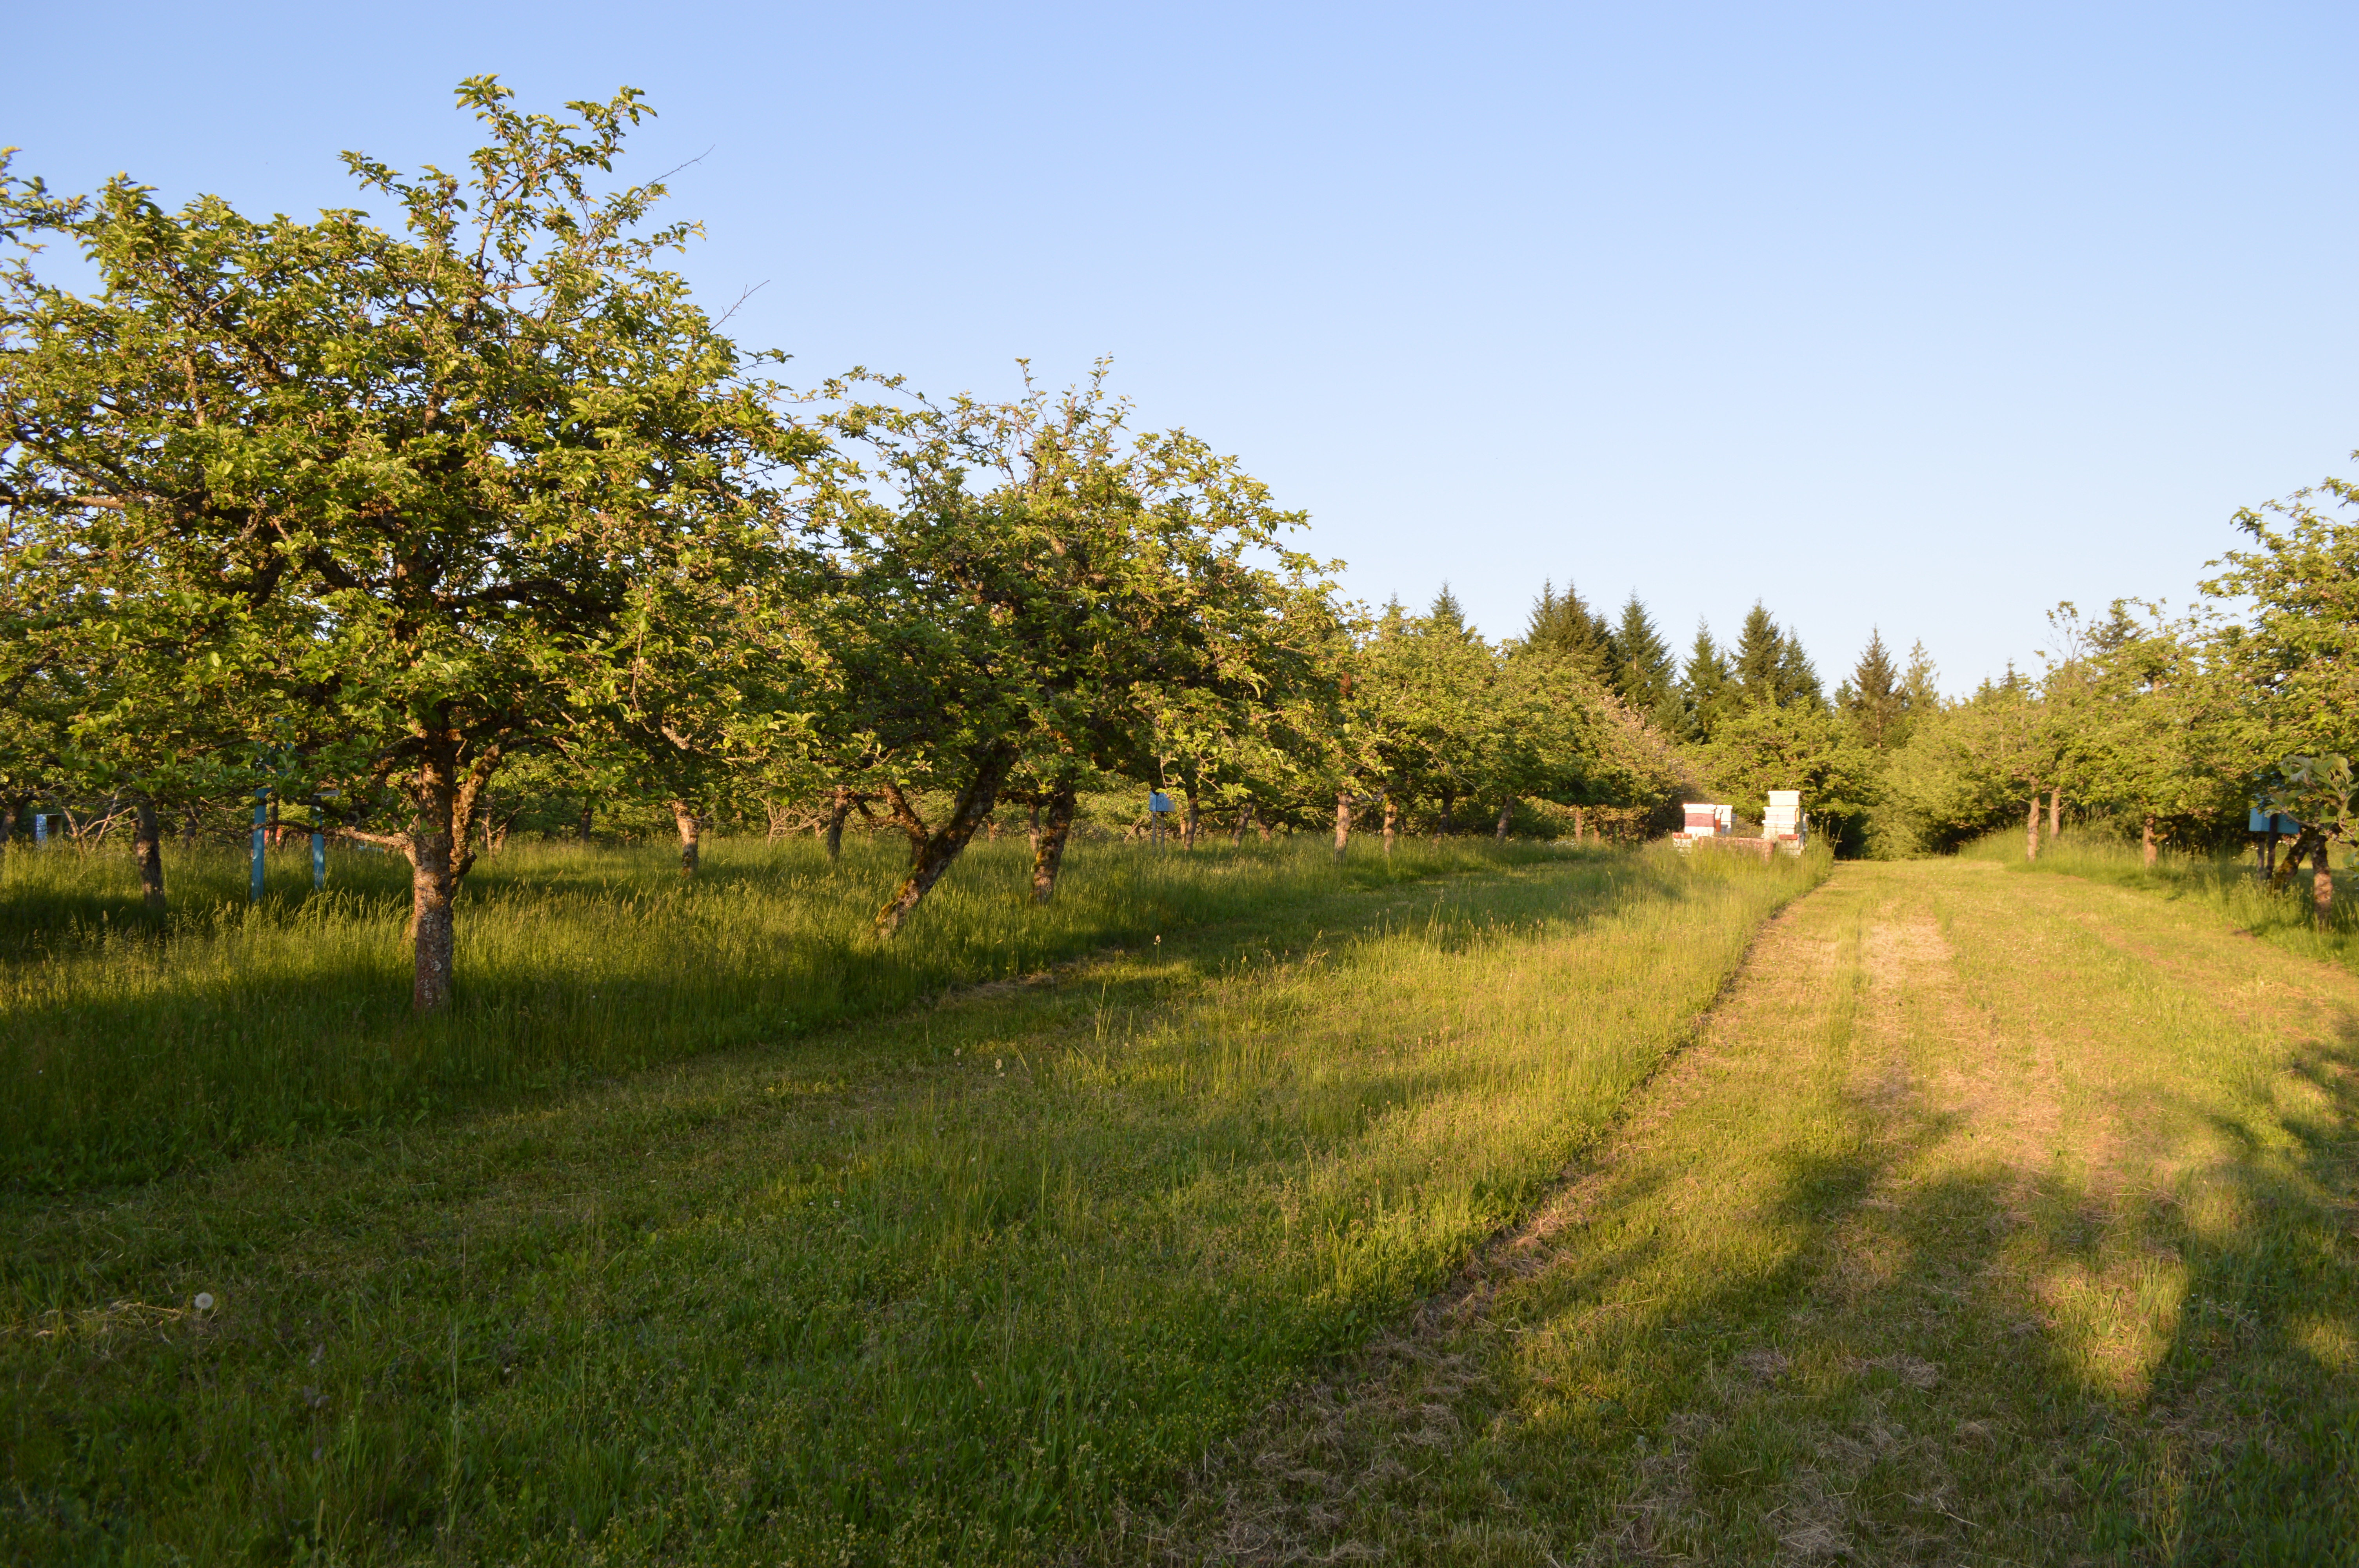 A view of the apple orchard and a small beekeeping set-up.